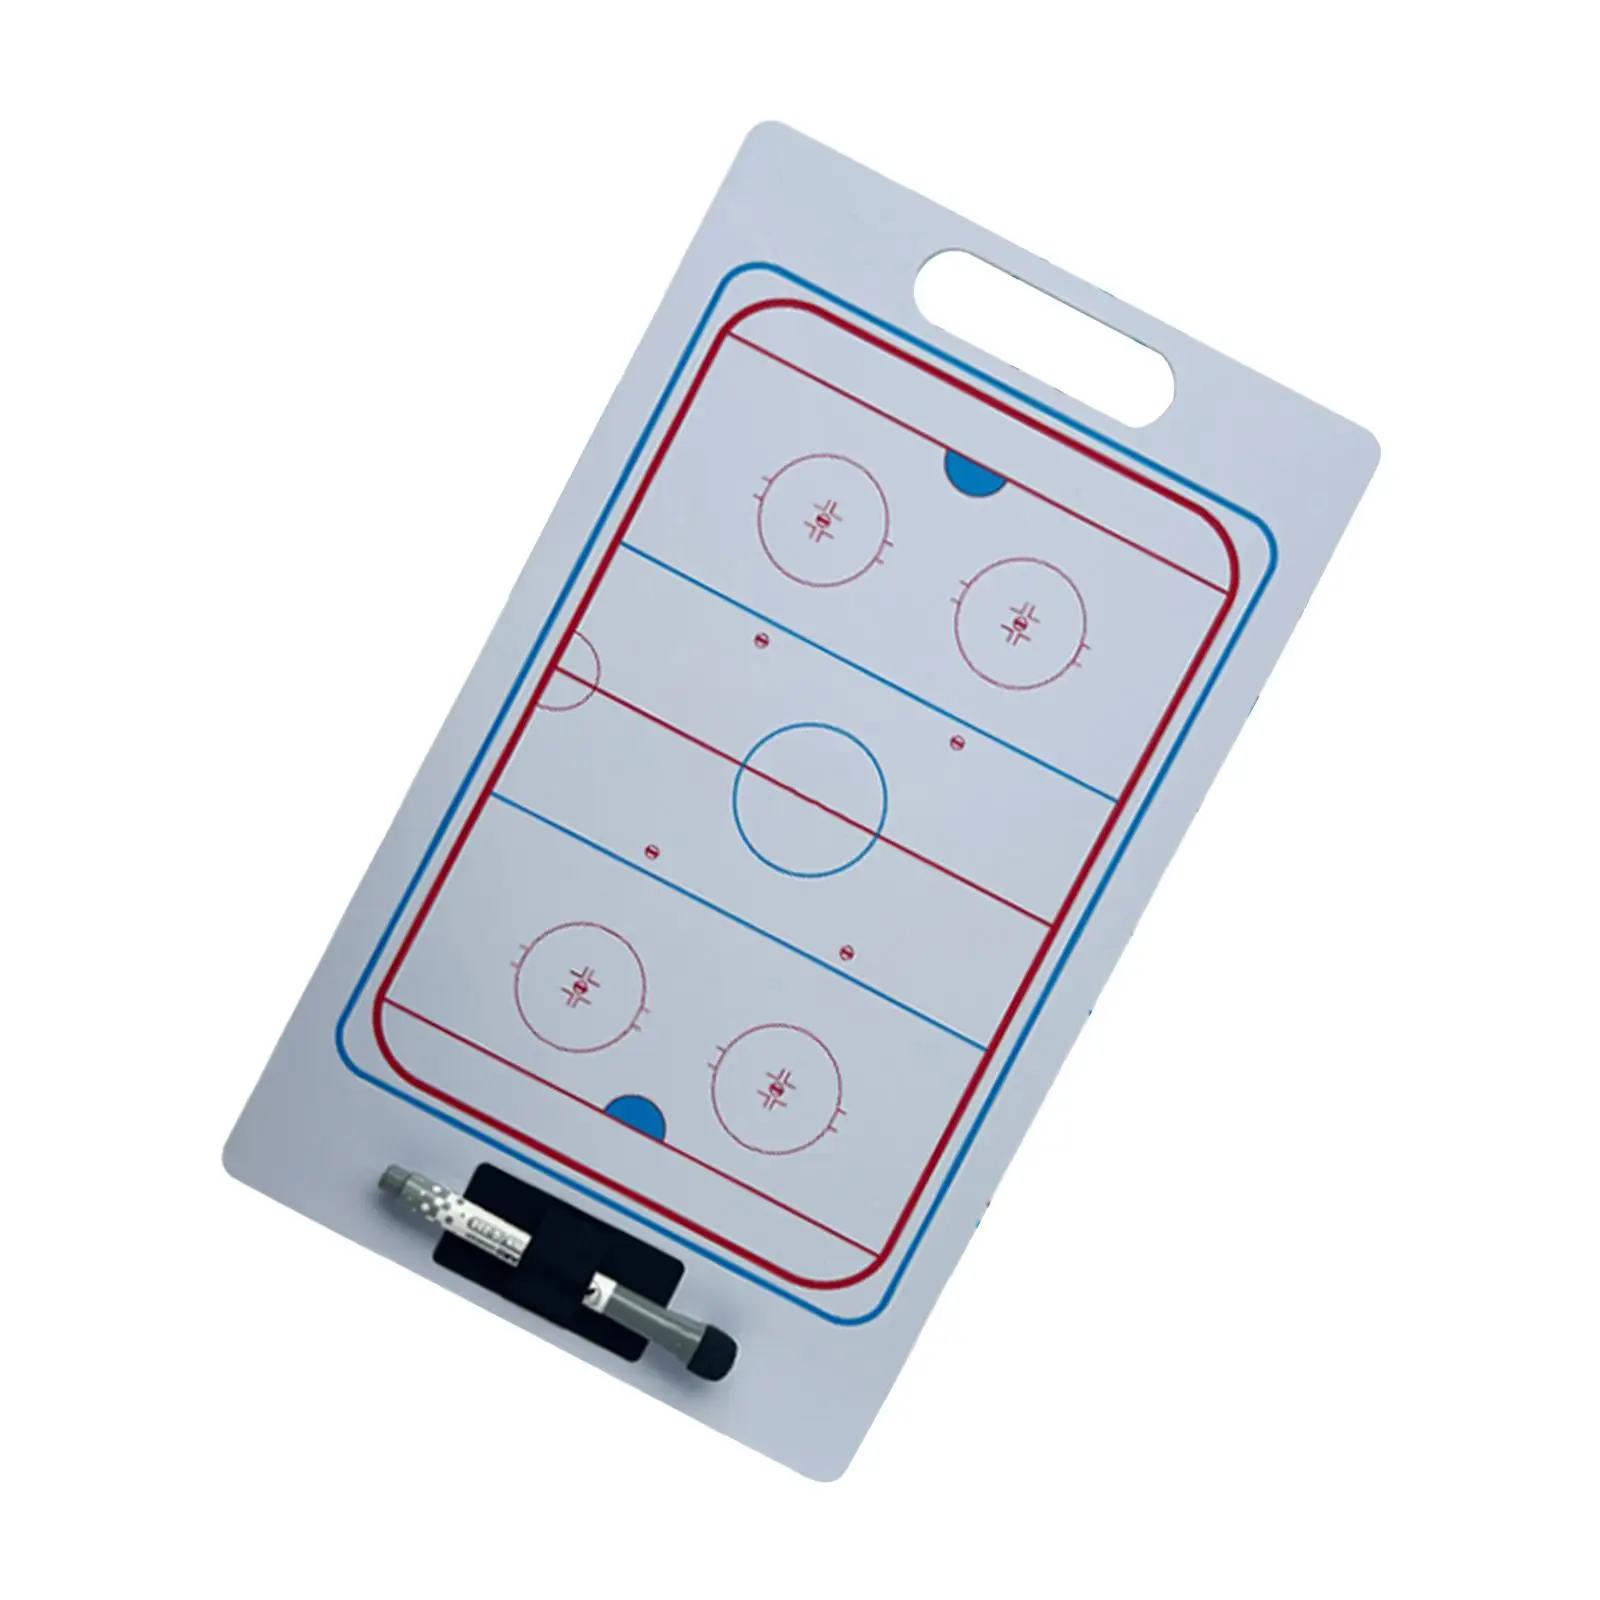 Ice Hockey Tactic Coaching Boards Training Equipment Professional Referees Gear Rewritable Football Coaching Boards